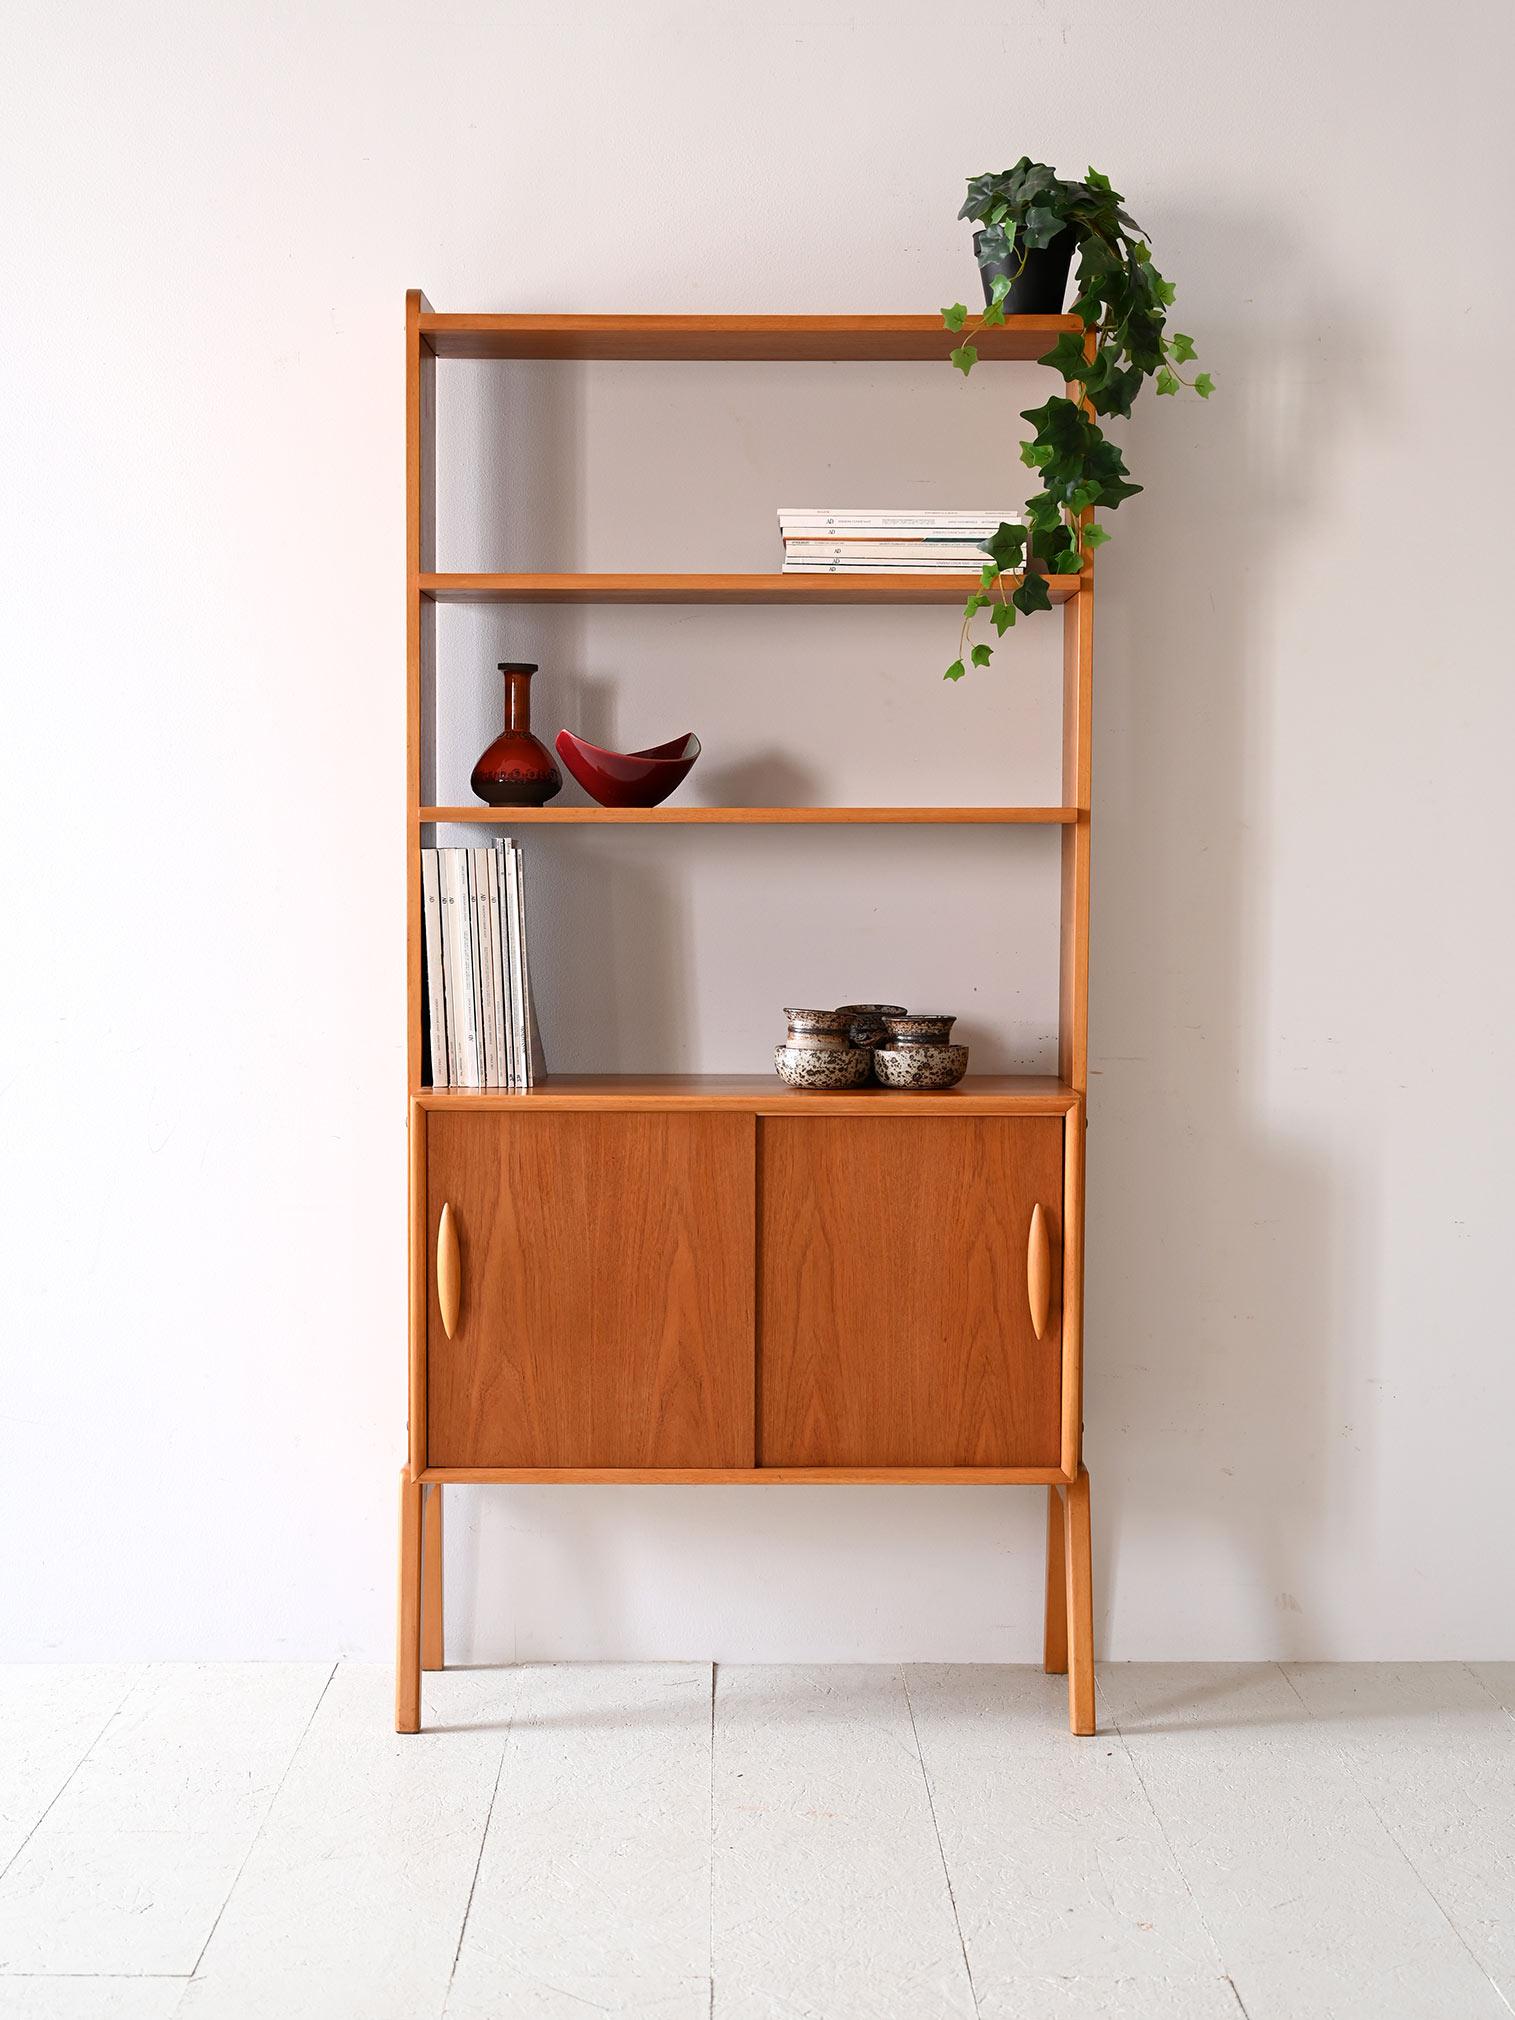 With its slender frame and sliding doors, this Swedish bookcase is a classic example of Scandinavian design from the 1950s and 1960s. Its shelves provide ample space for books and decorative items, while sliding doors conceal what you prefer to keep